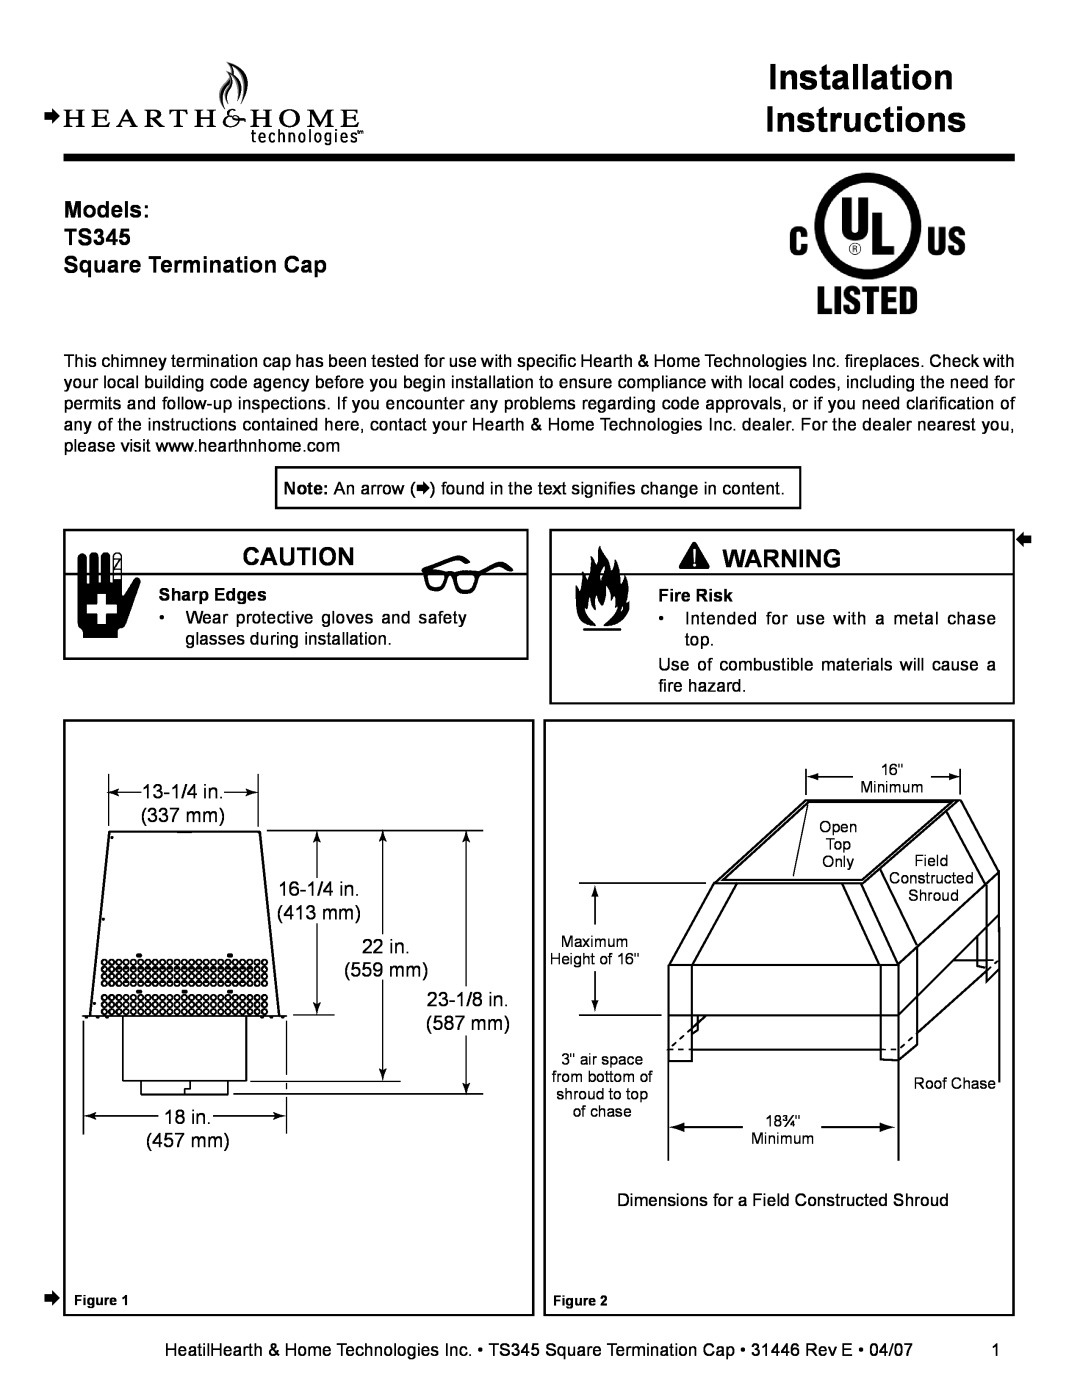 Hearth and Home Technologies TS345 installation instructions Installation Instructions 